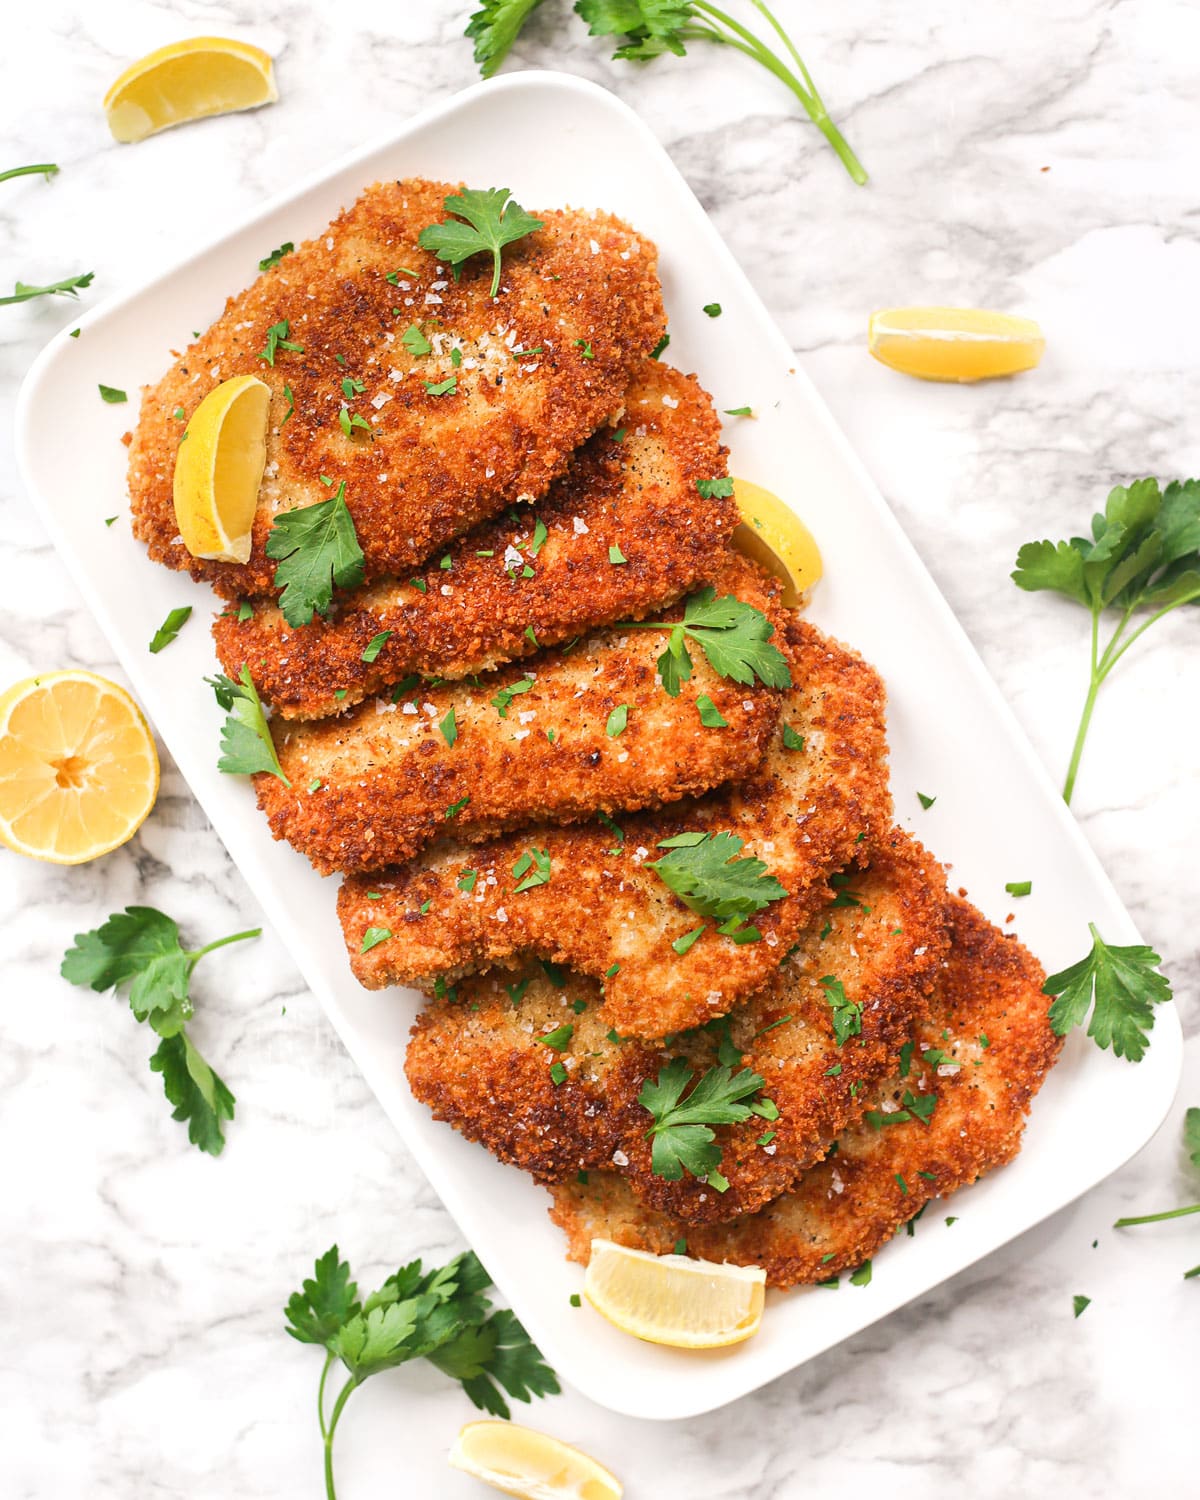 pork schnitzels on a platter with lemon wedges and parsley